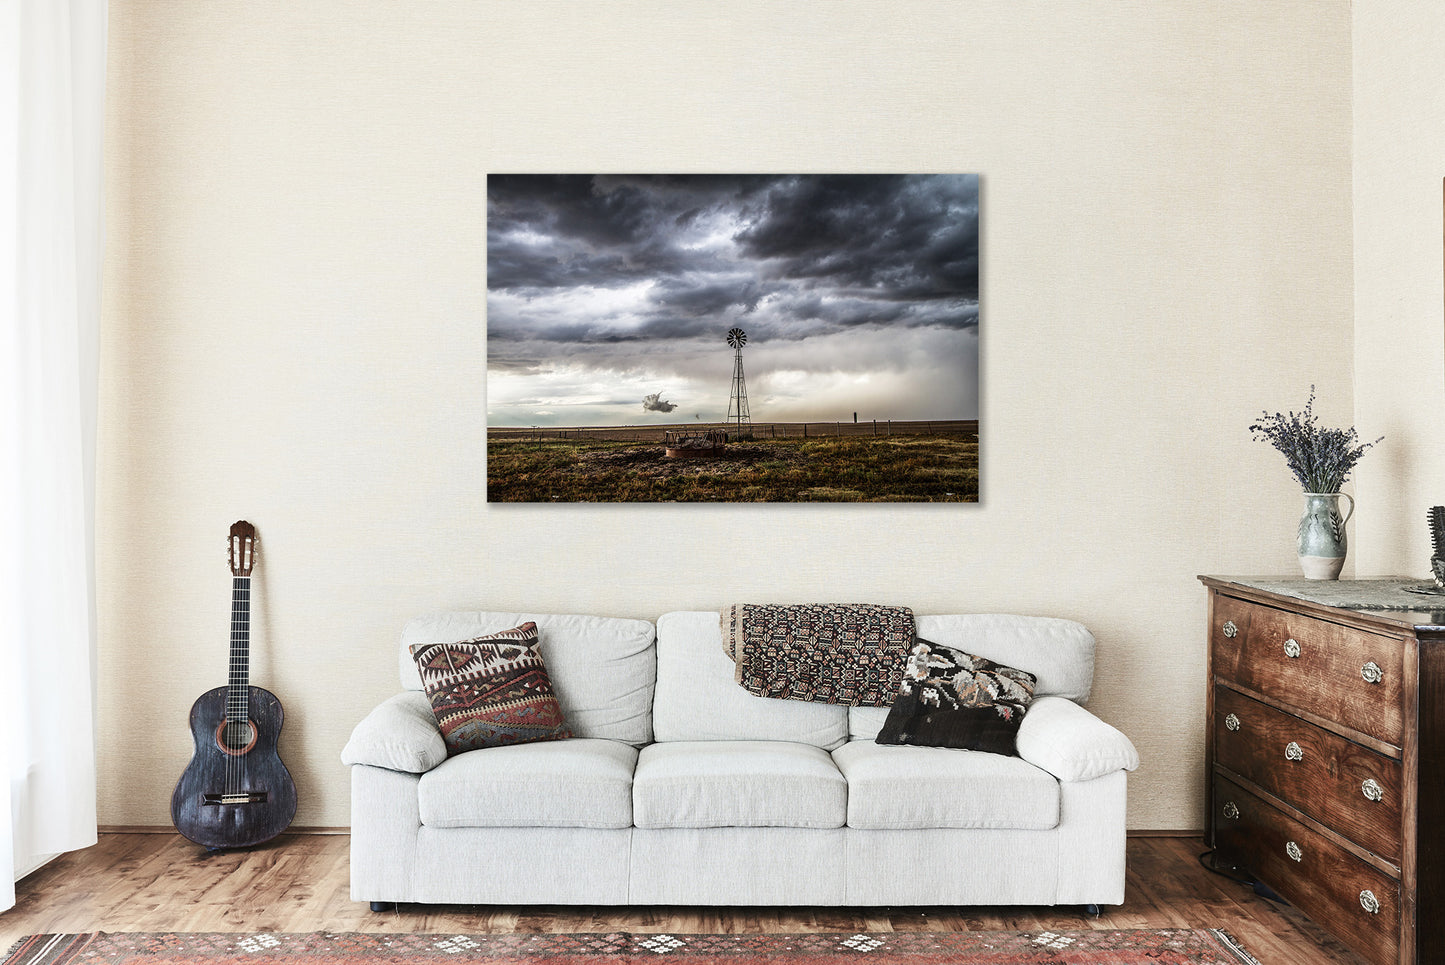 Farm Canvas Wall Art - Gallery Wrap of Old Windmill Under Stormy Sky in Oklahoma - Country Farmhouse Photography Artwork Decor